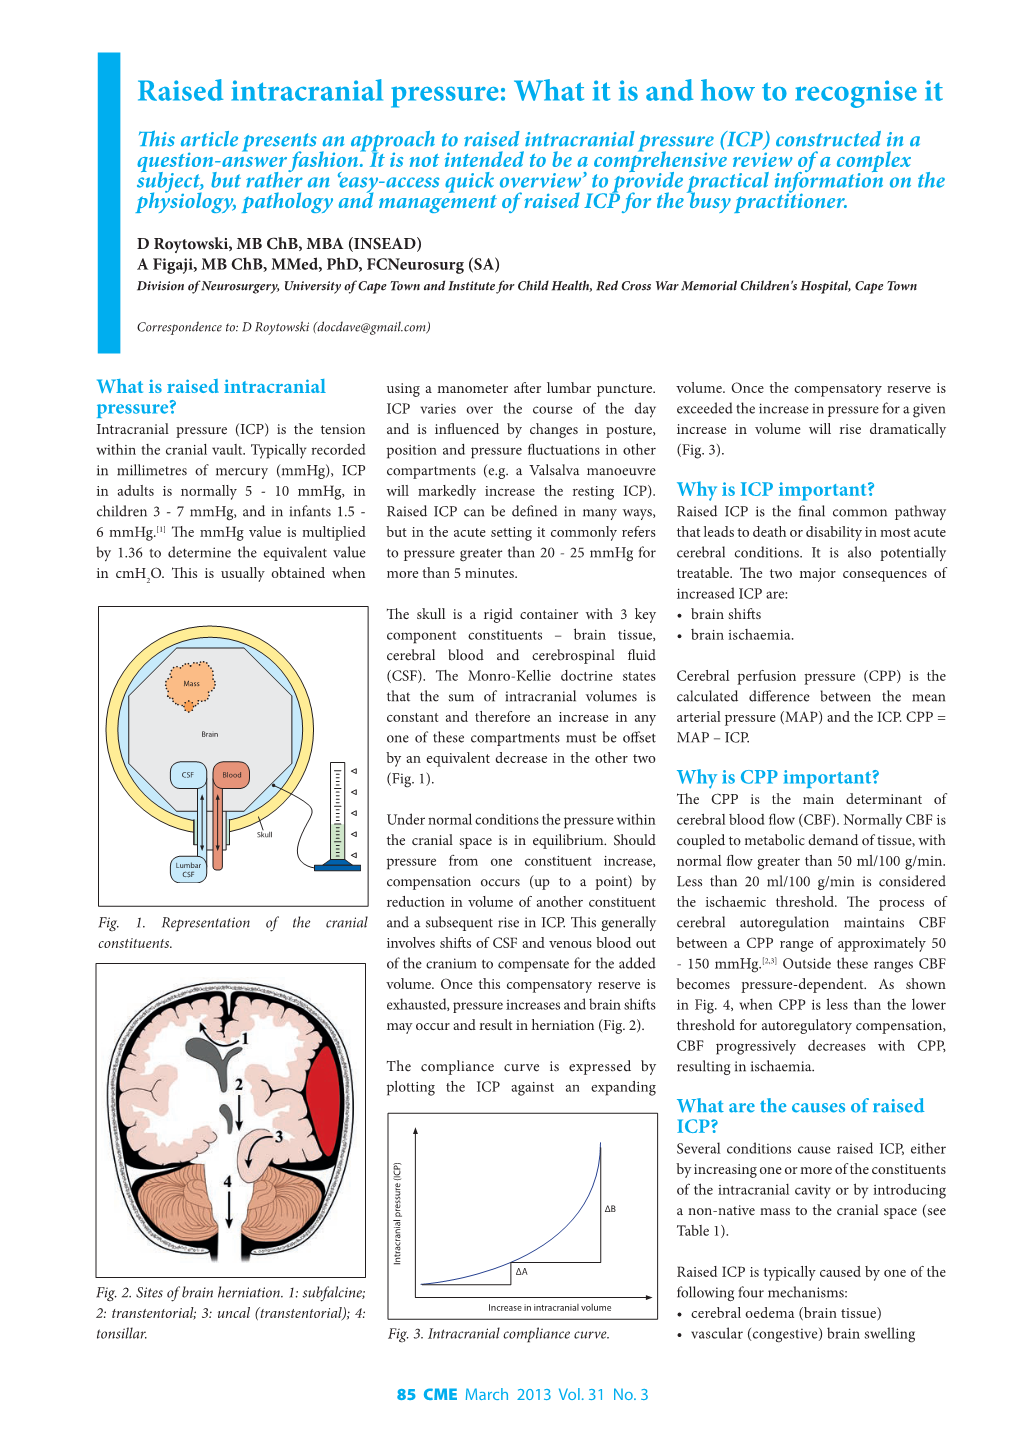 Raised Intracranial Pressure: What It Is and How to Recognise It